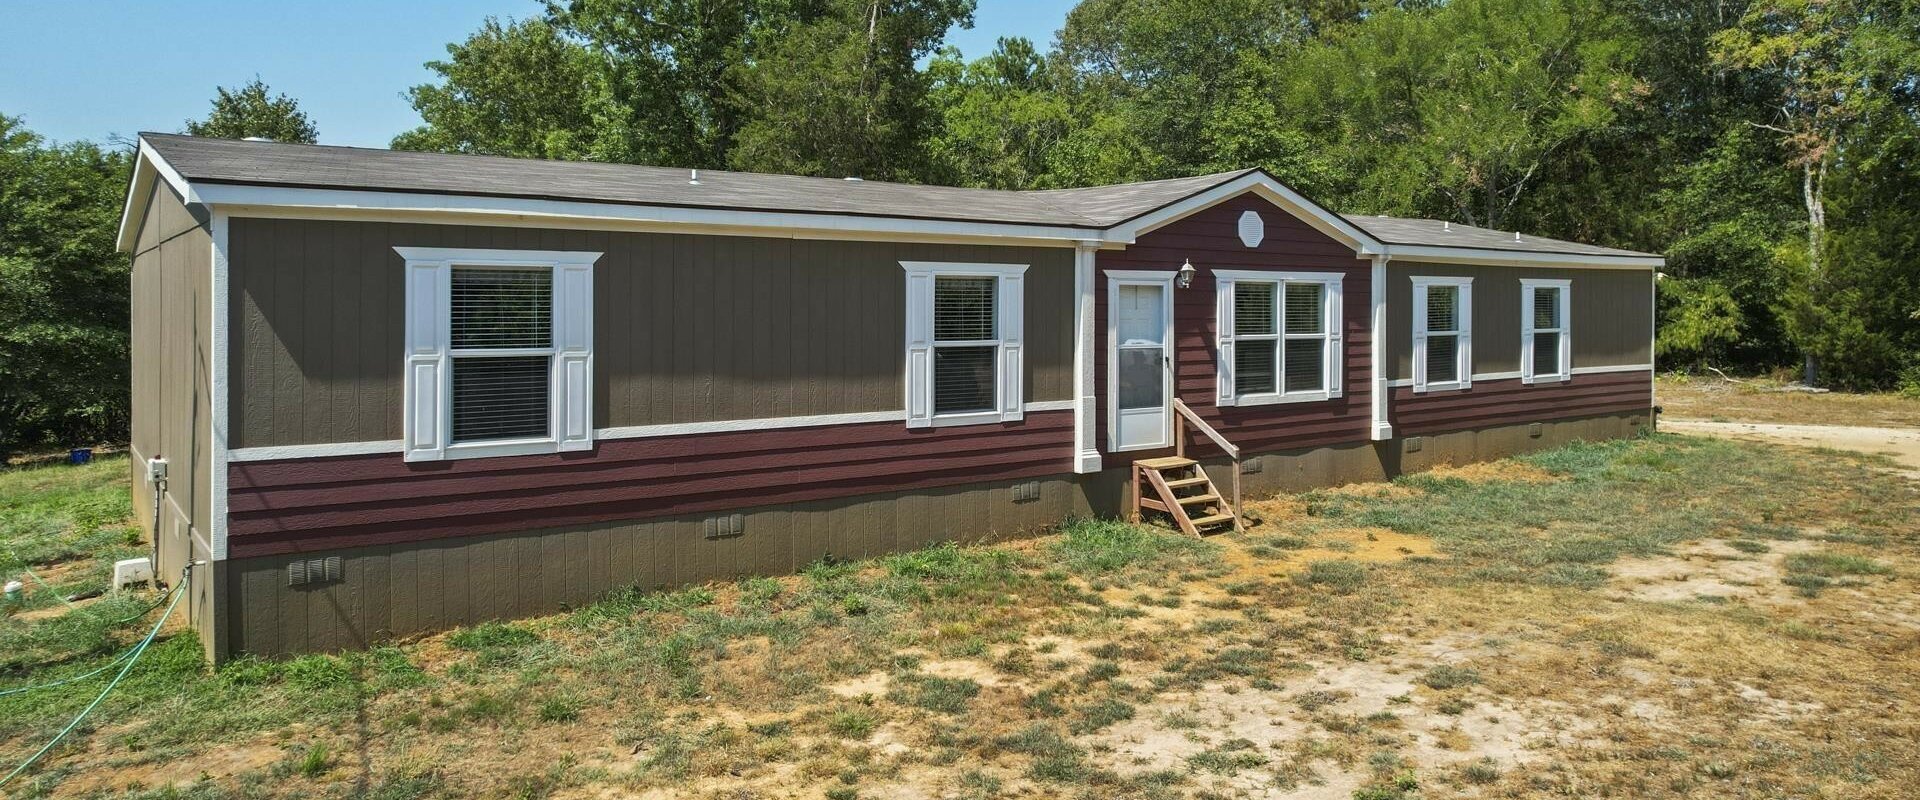 Sell Your Mobile Home In Alabama